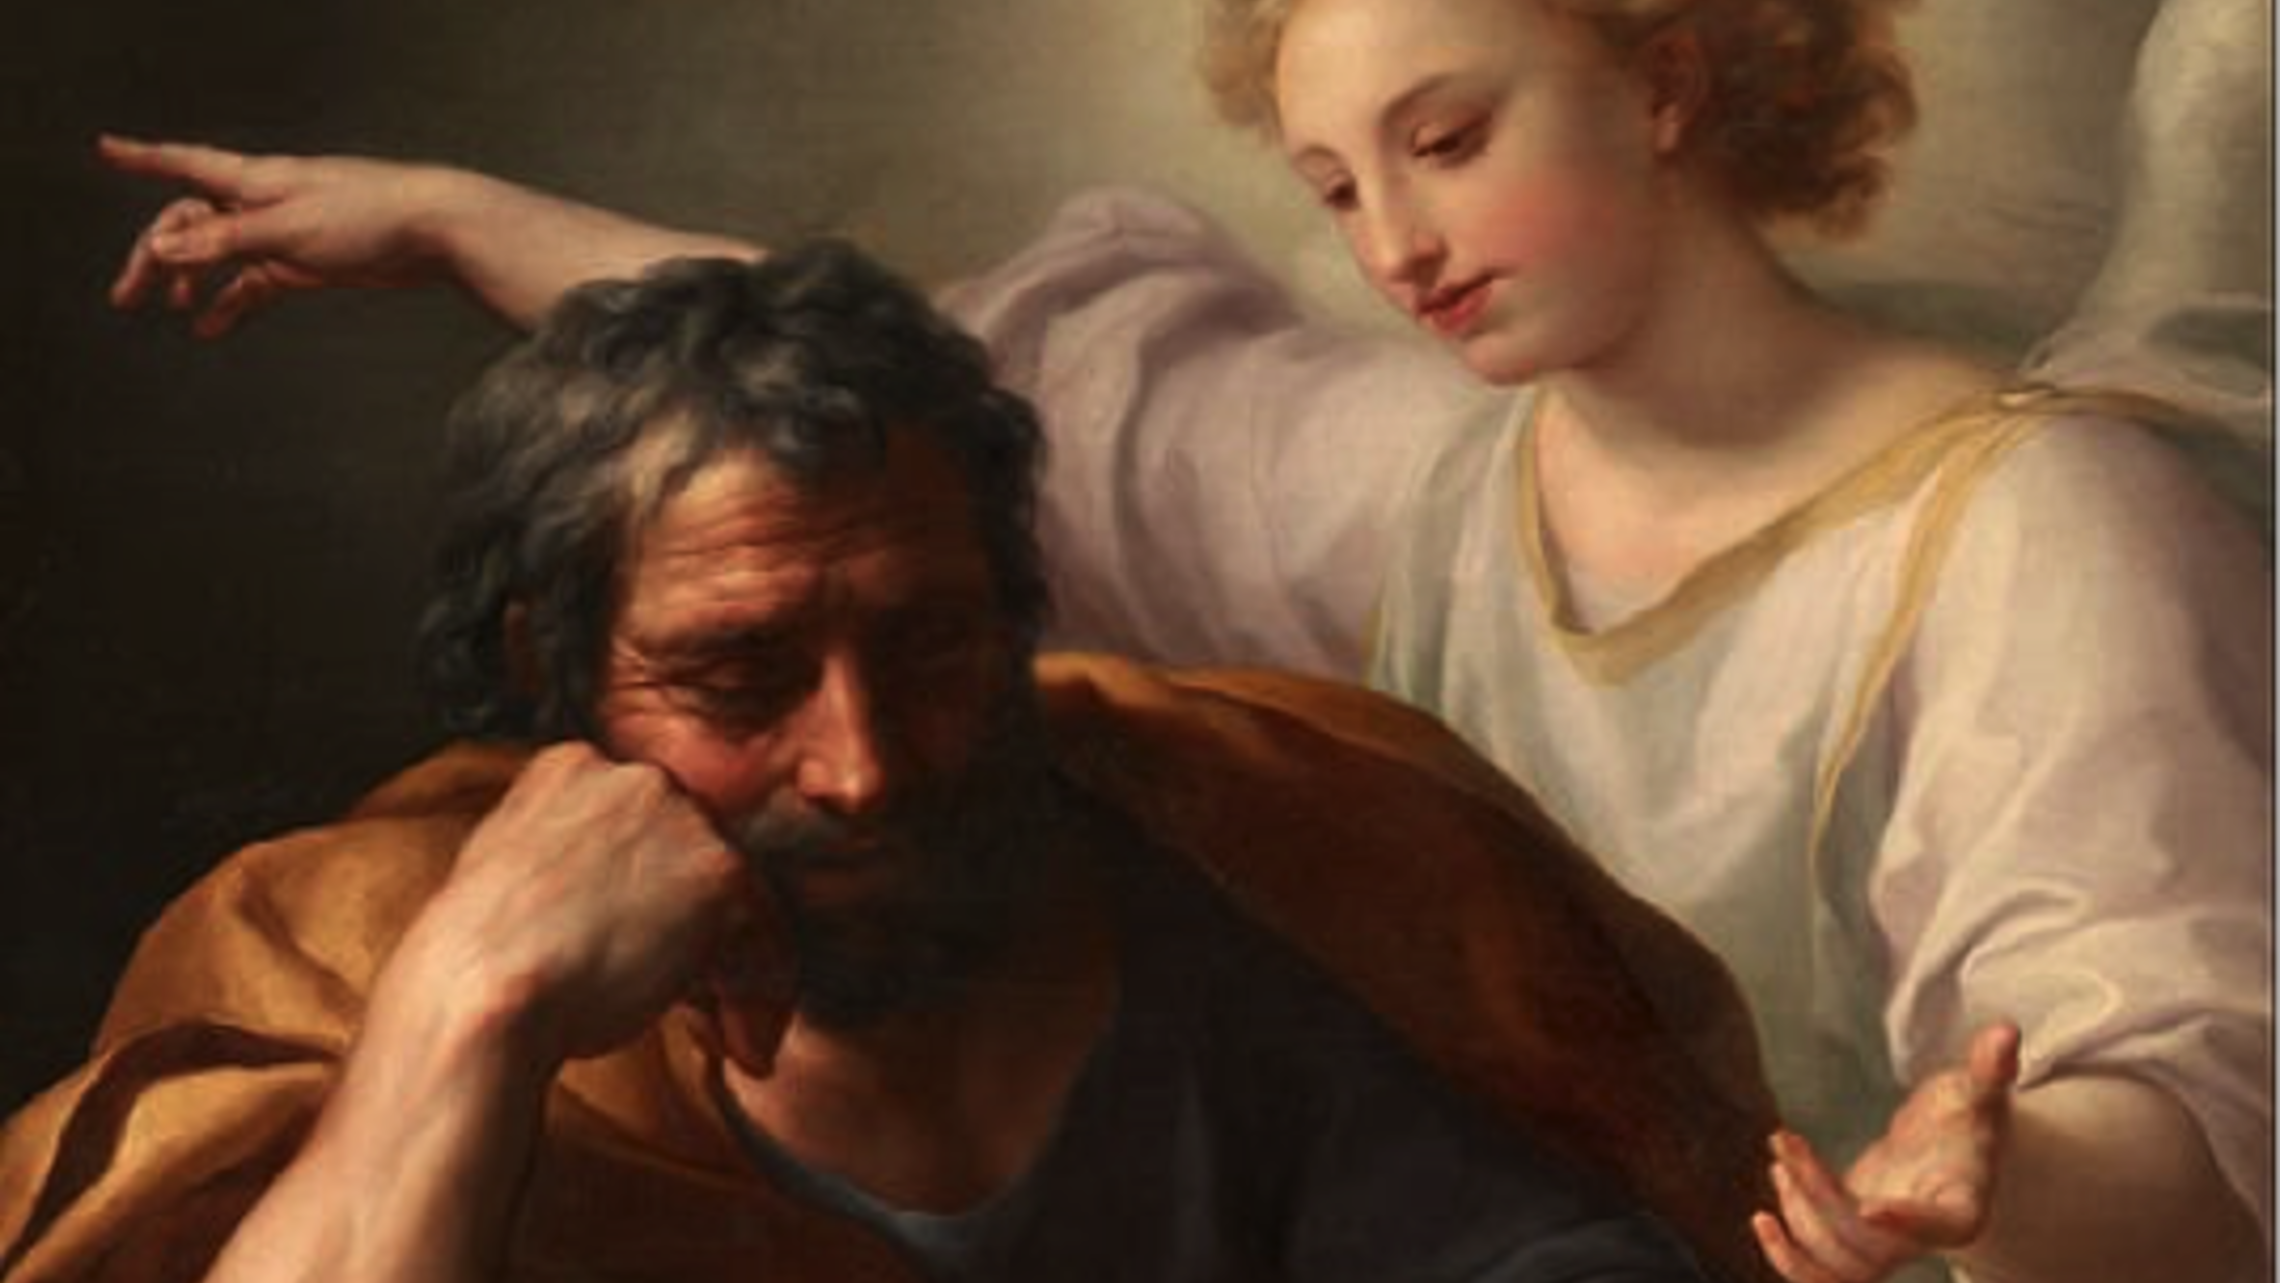 St. Joseph sits in thought with an Angel